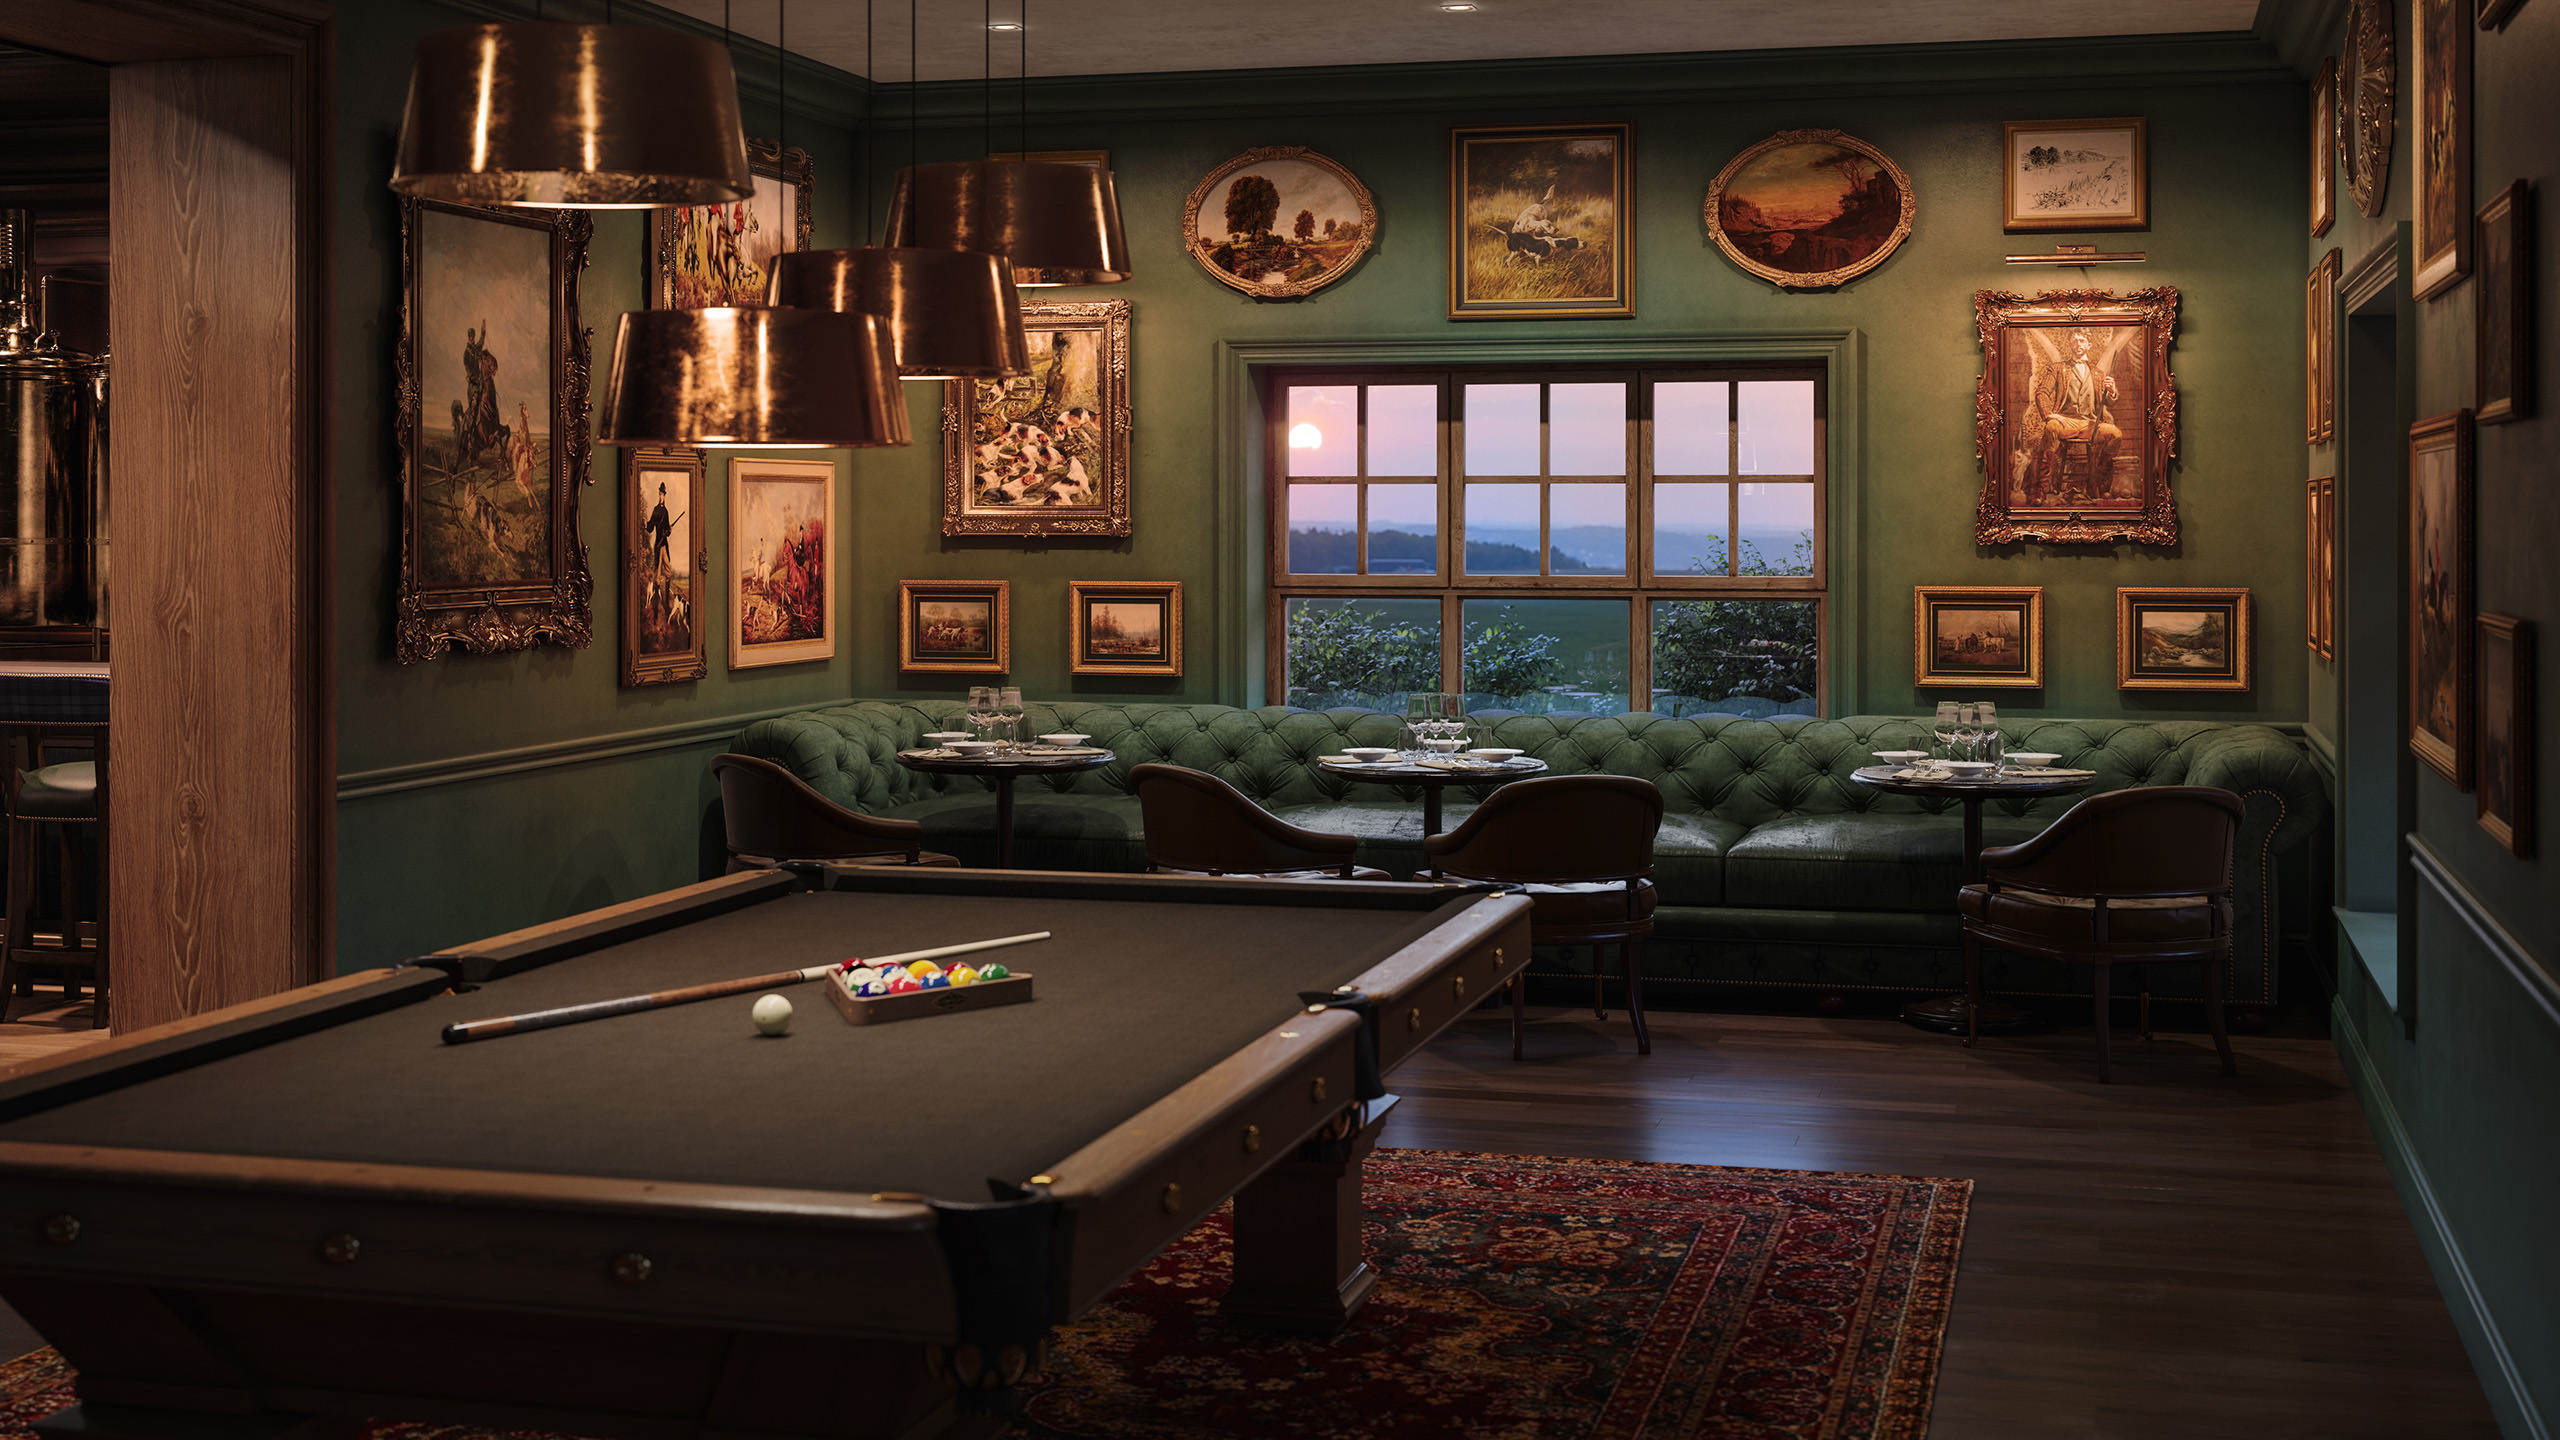 3D interior rendering of a classical chillout zone with a billiards table and a massive sofa with seating arrangements